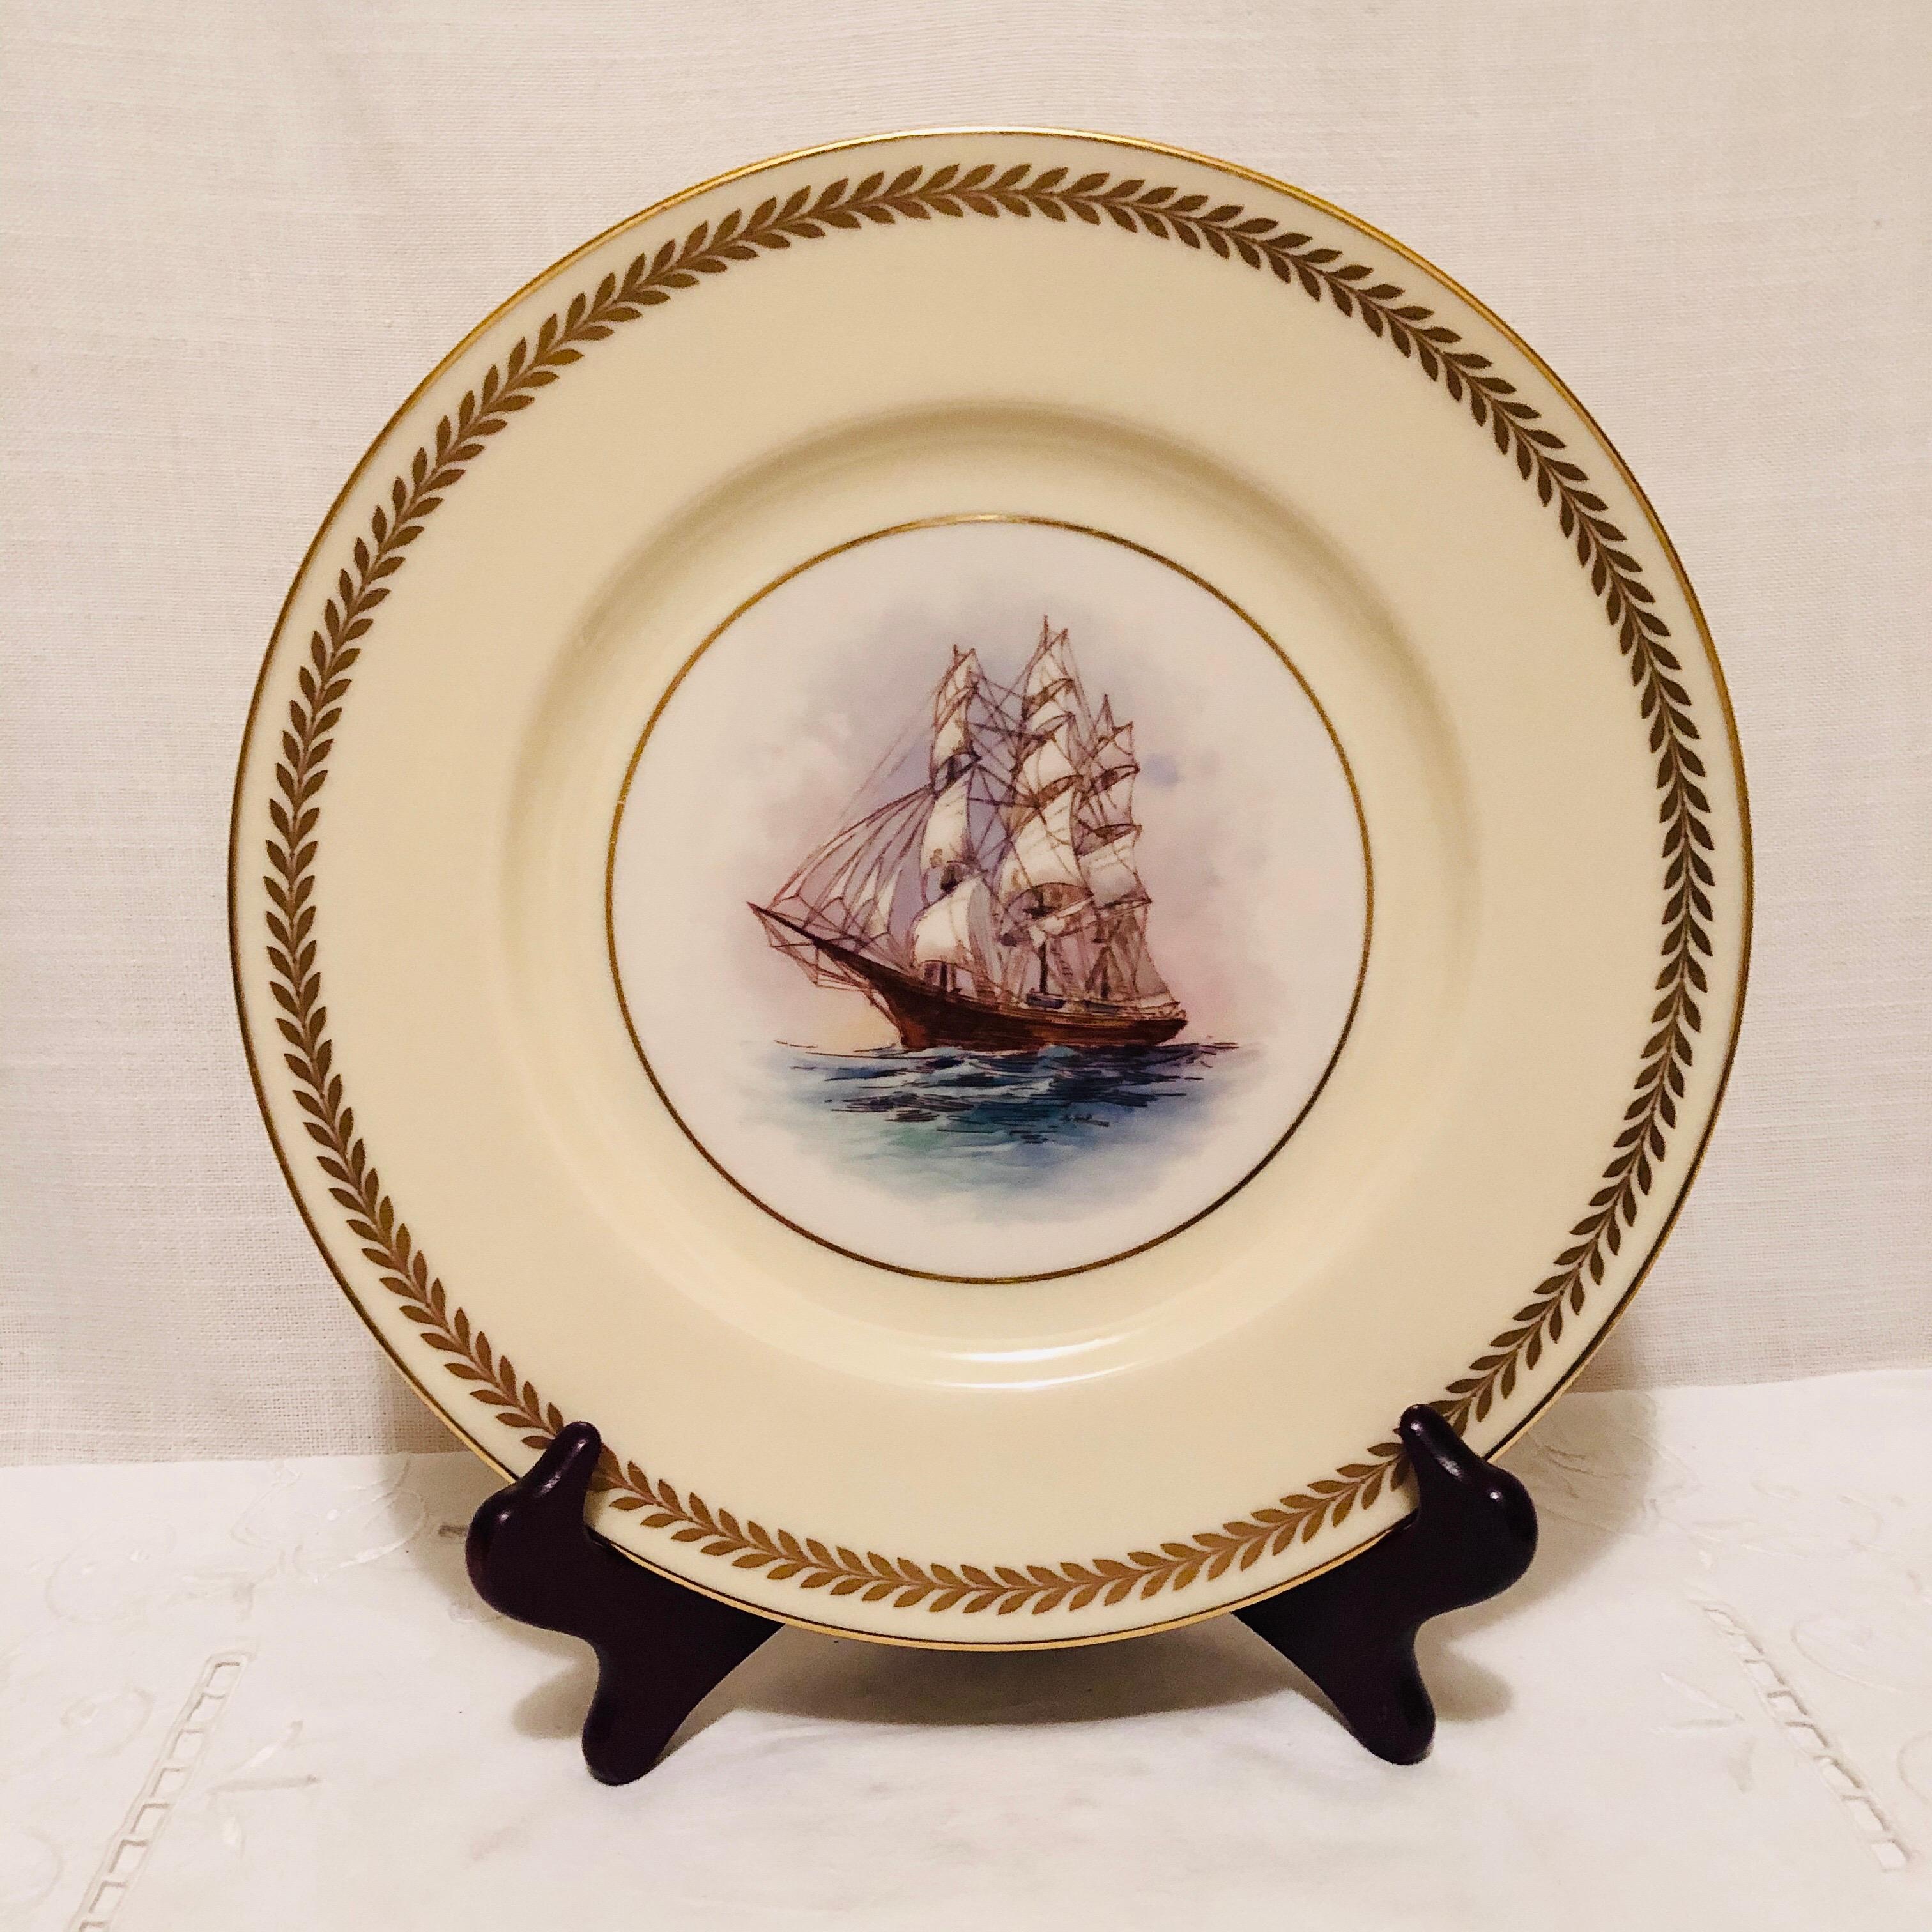 American Set of Twelve Lenox Plates Each Hand Painted with a Different Tall Ship